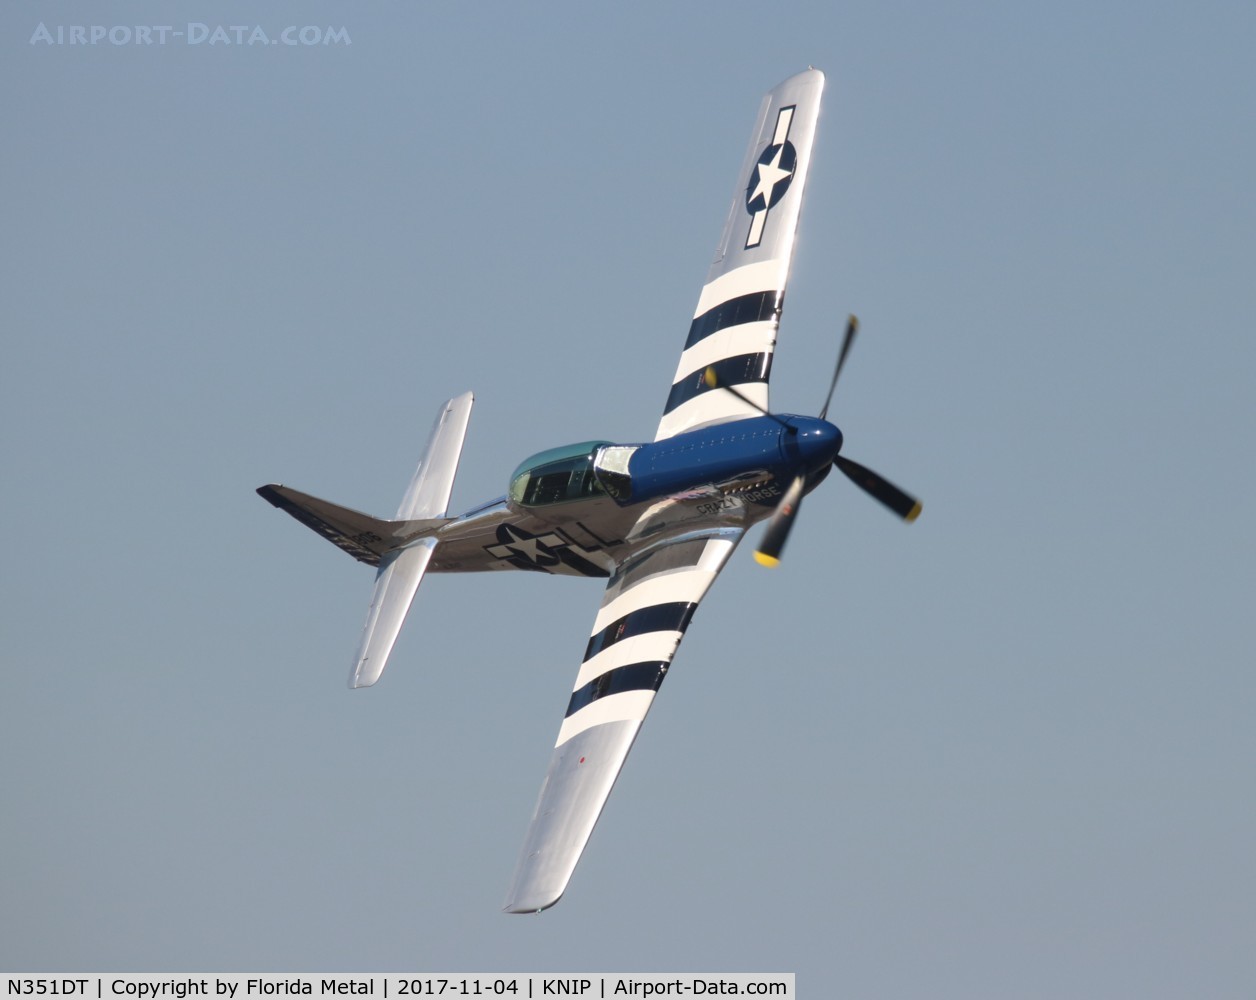 N351DT, 1944 North American P-51D Mustang C/N 122-41042, Crazy Horse 2 zx